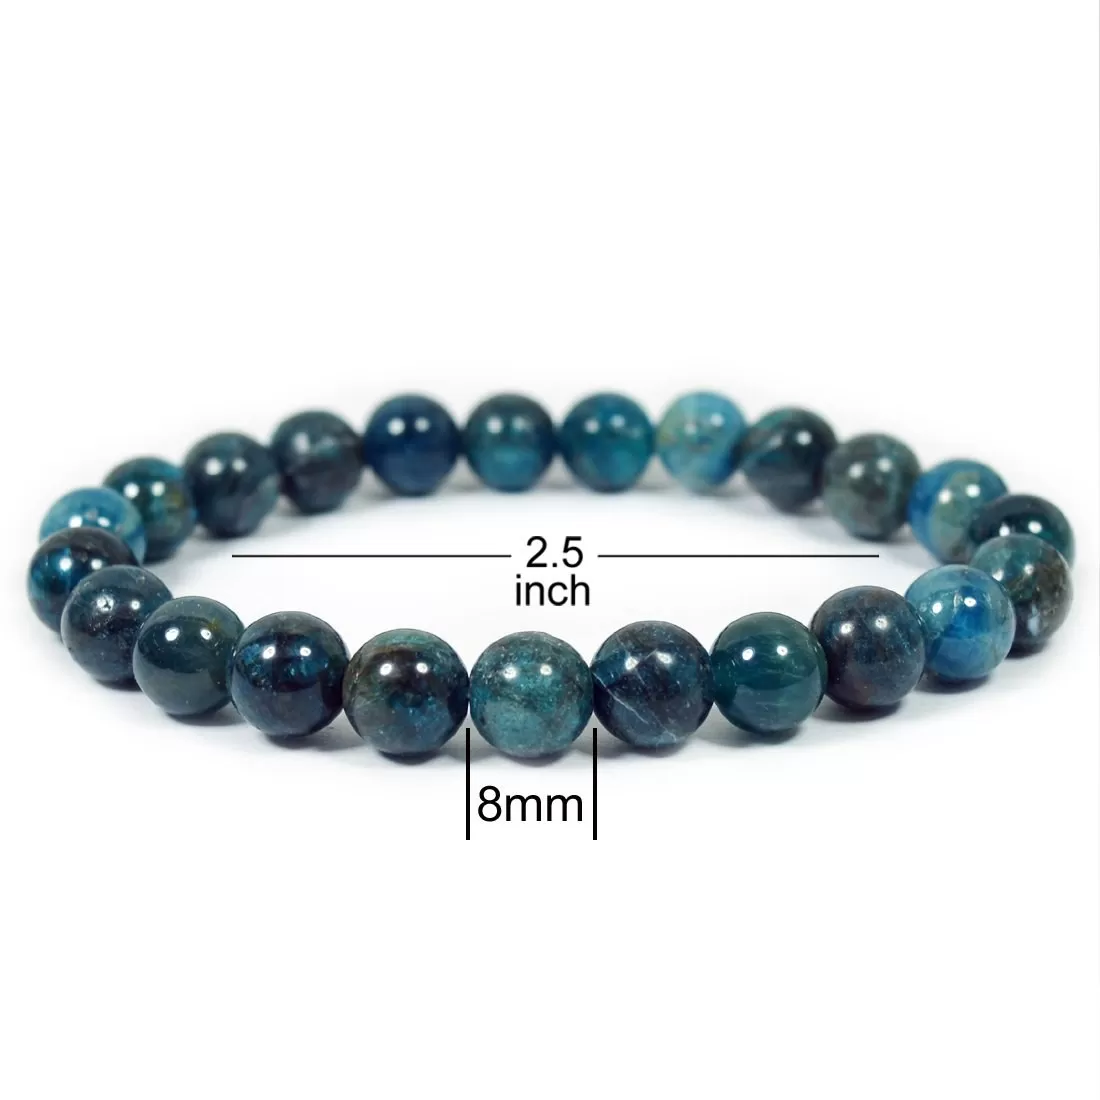 Reiki Crystal Products Natural Apatite Bracelet 8mm for Reiki Healing and Vastu Correction Protection Concentration Spirituality and Increasing Creativity